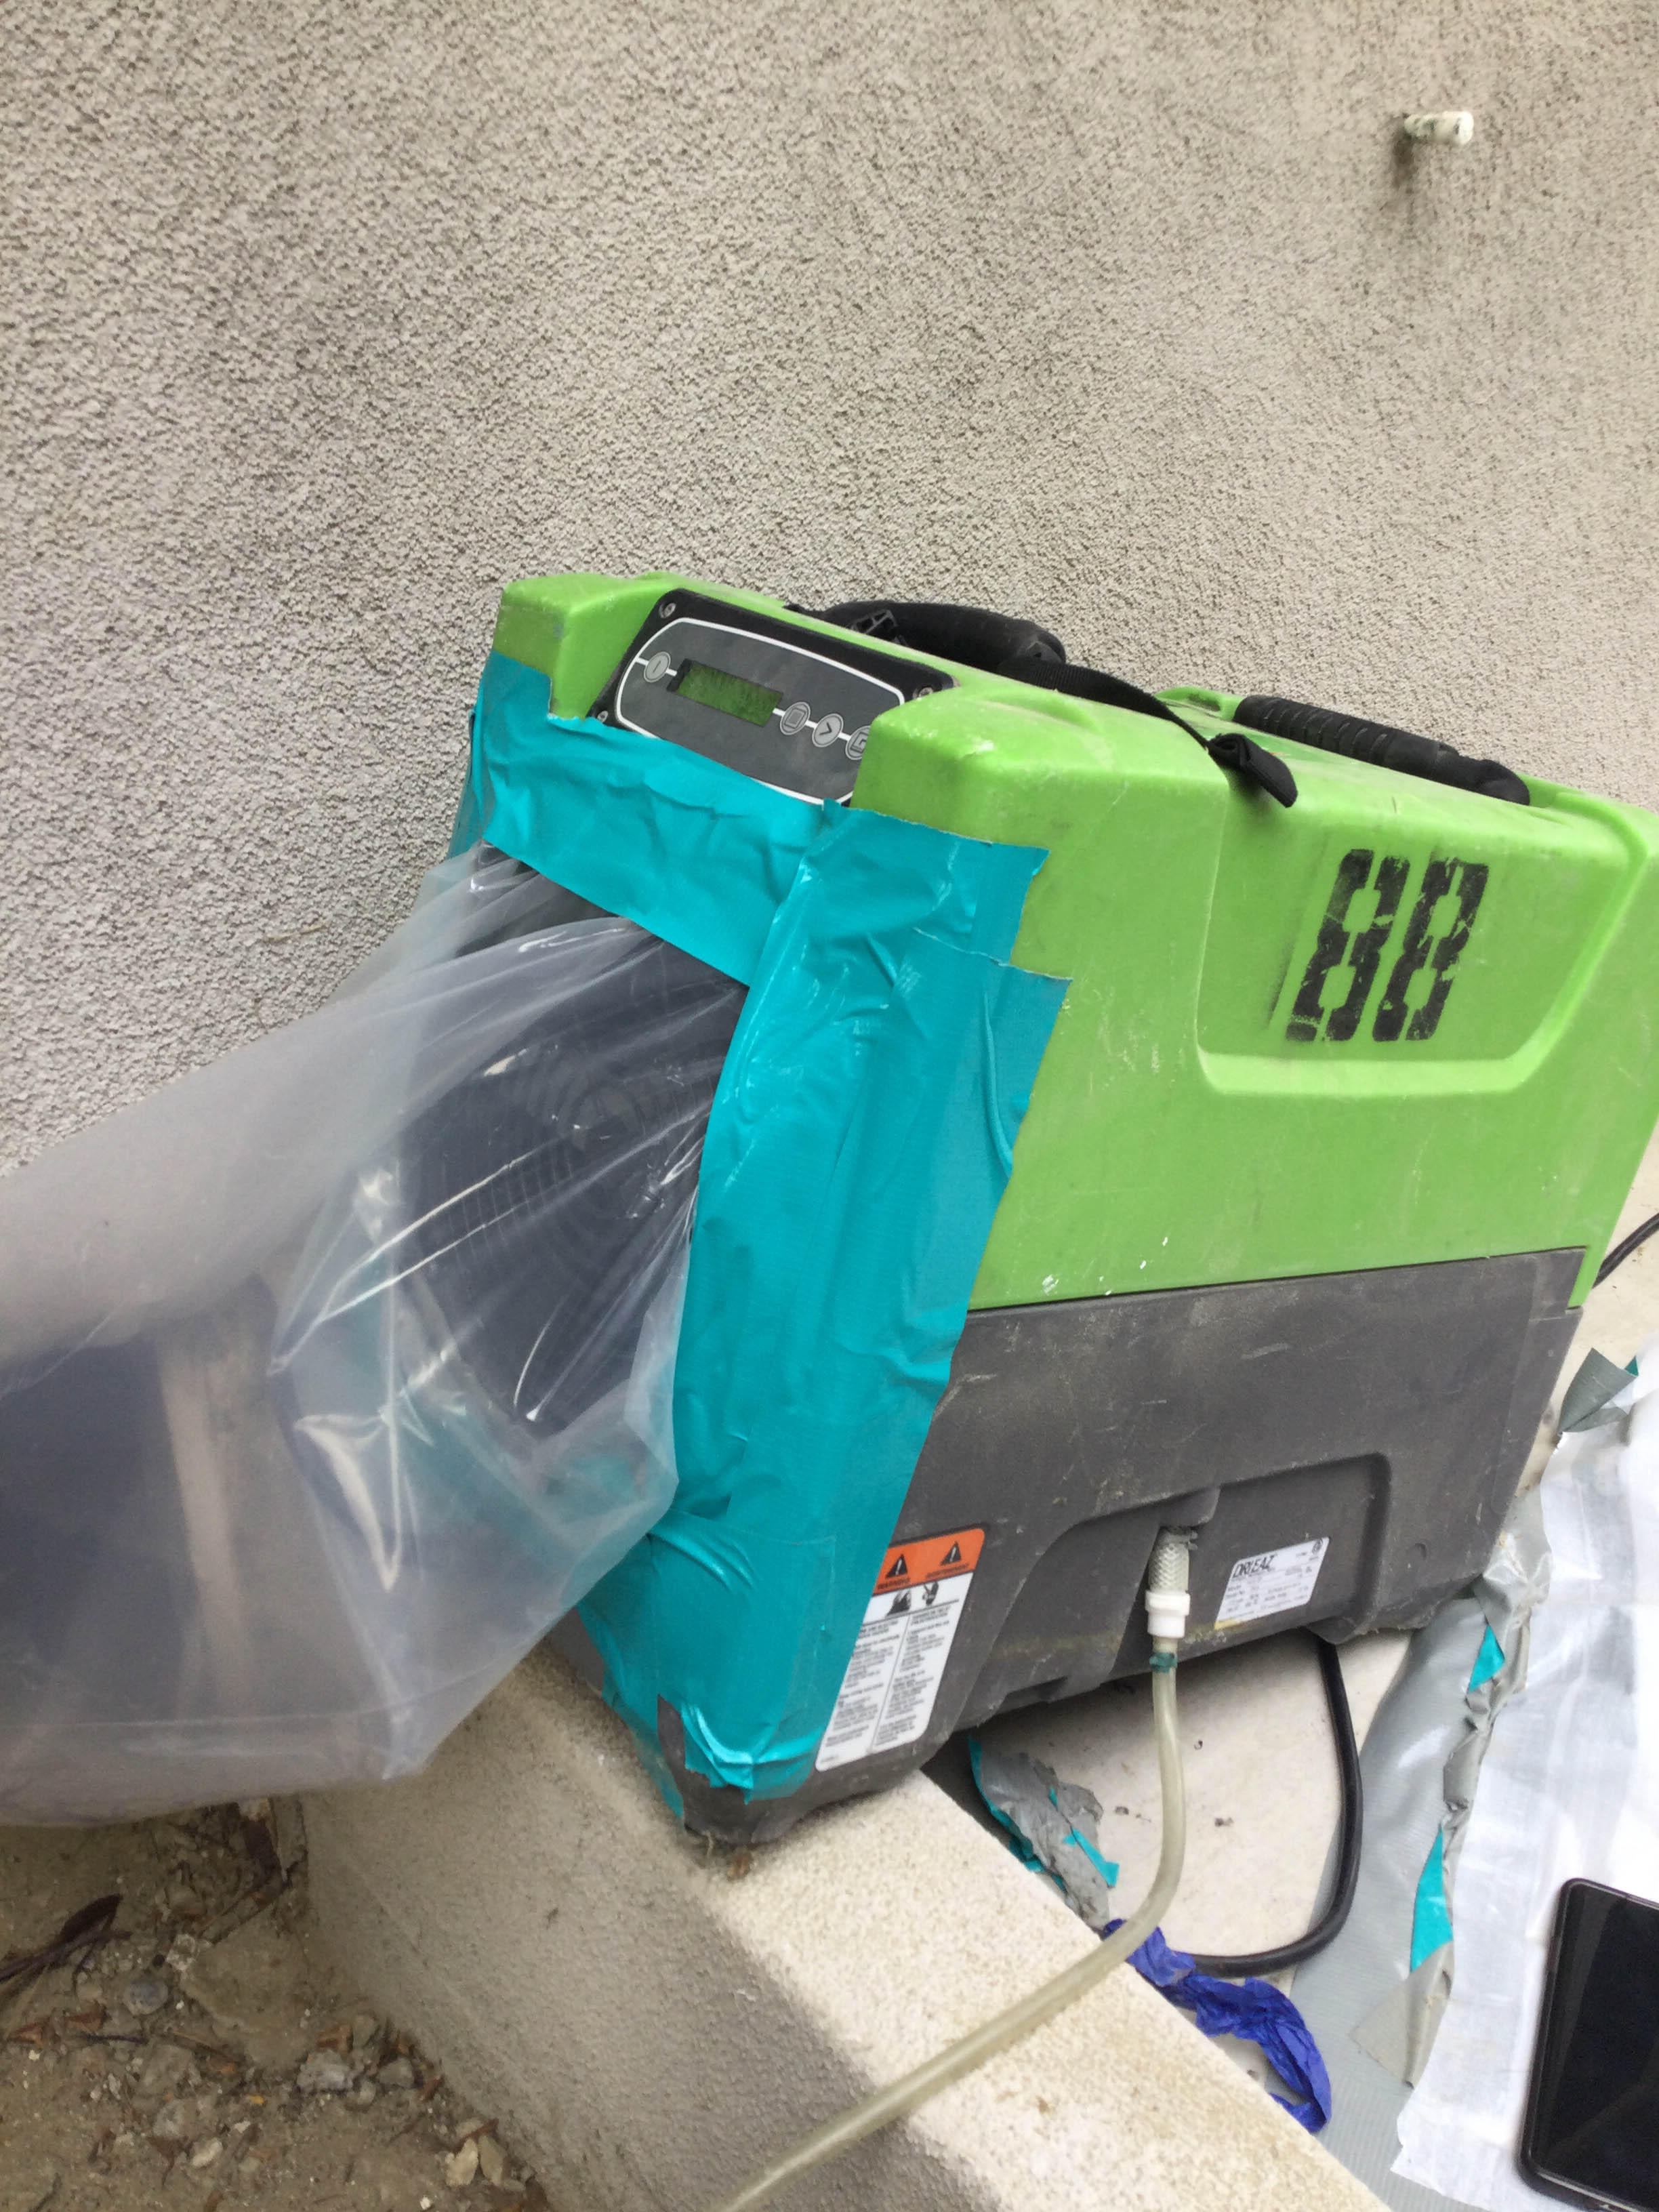 SERVPRO of Laguna Beach / Dana point has the right equipment to deal with any water damage emergency.